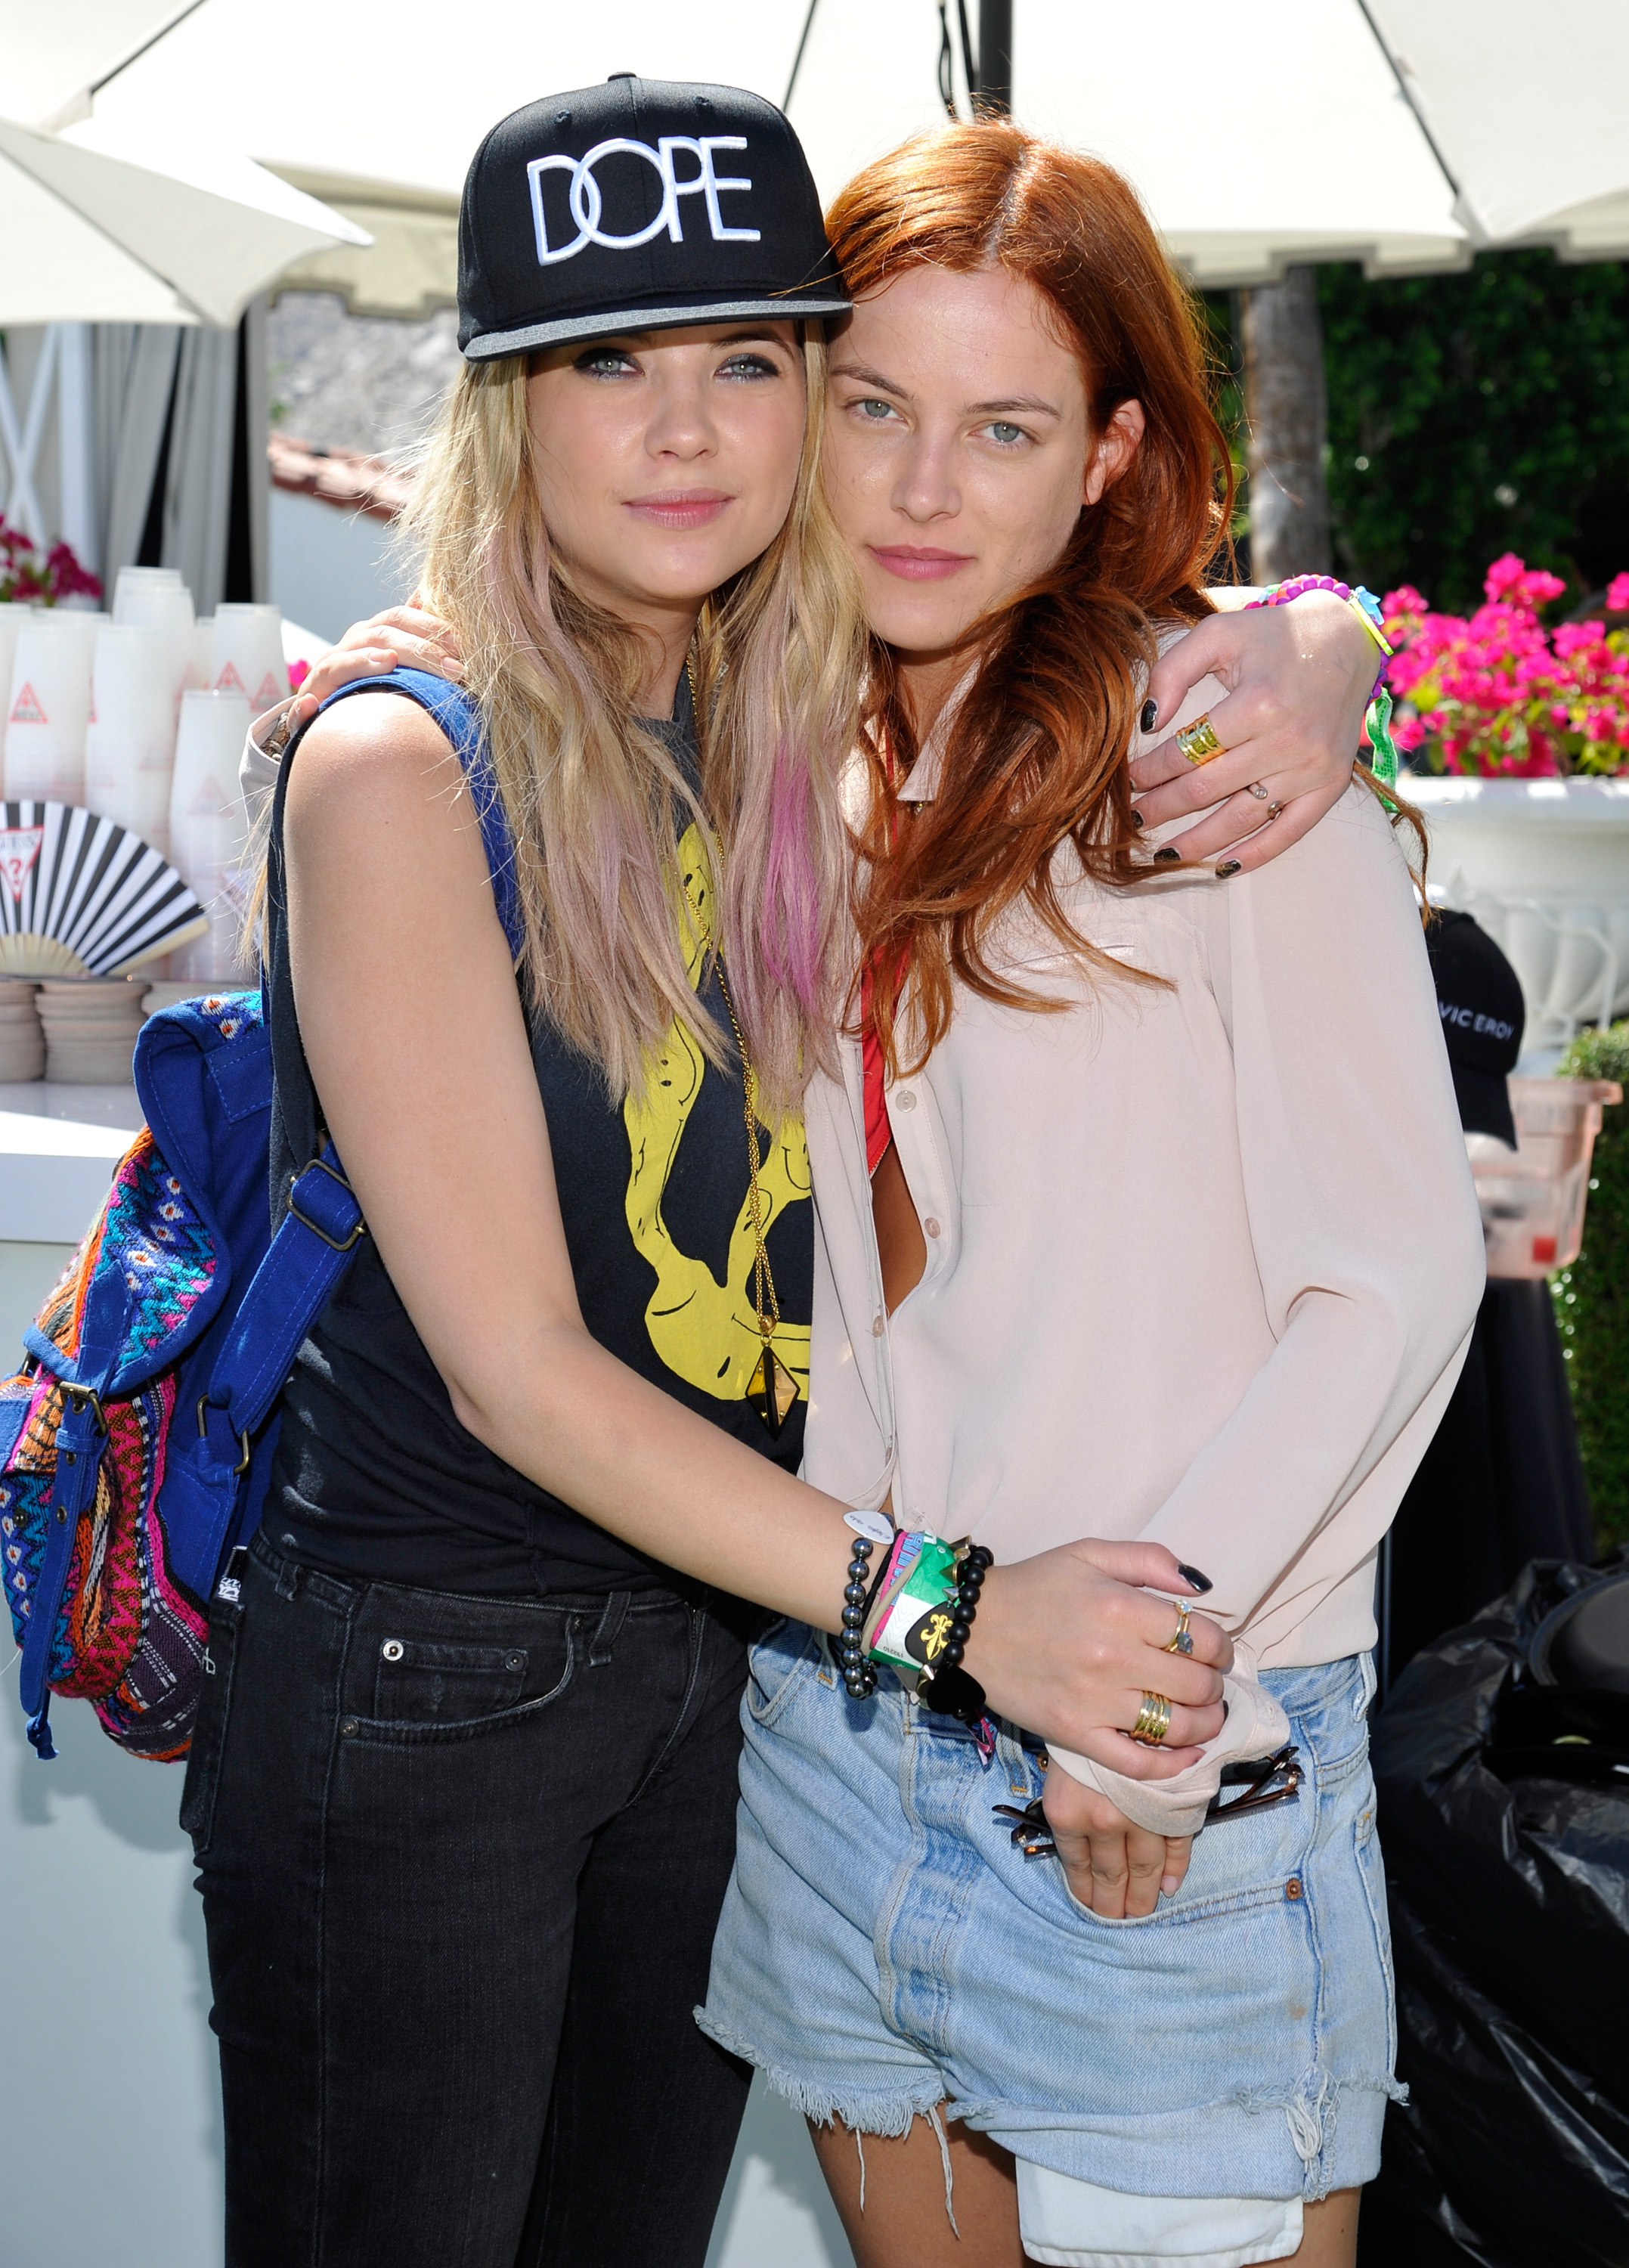 PALM SPRINGS, CA - APRIL 14: Ashley Benson and Riley Keough attend the GUESS Hotel pool party at the Viceroy Palm Springs on April 14, 2013 in Palm Springs, California. (Photo by John Sciulli/Getty Images for GUESS)